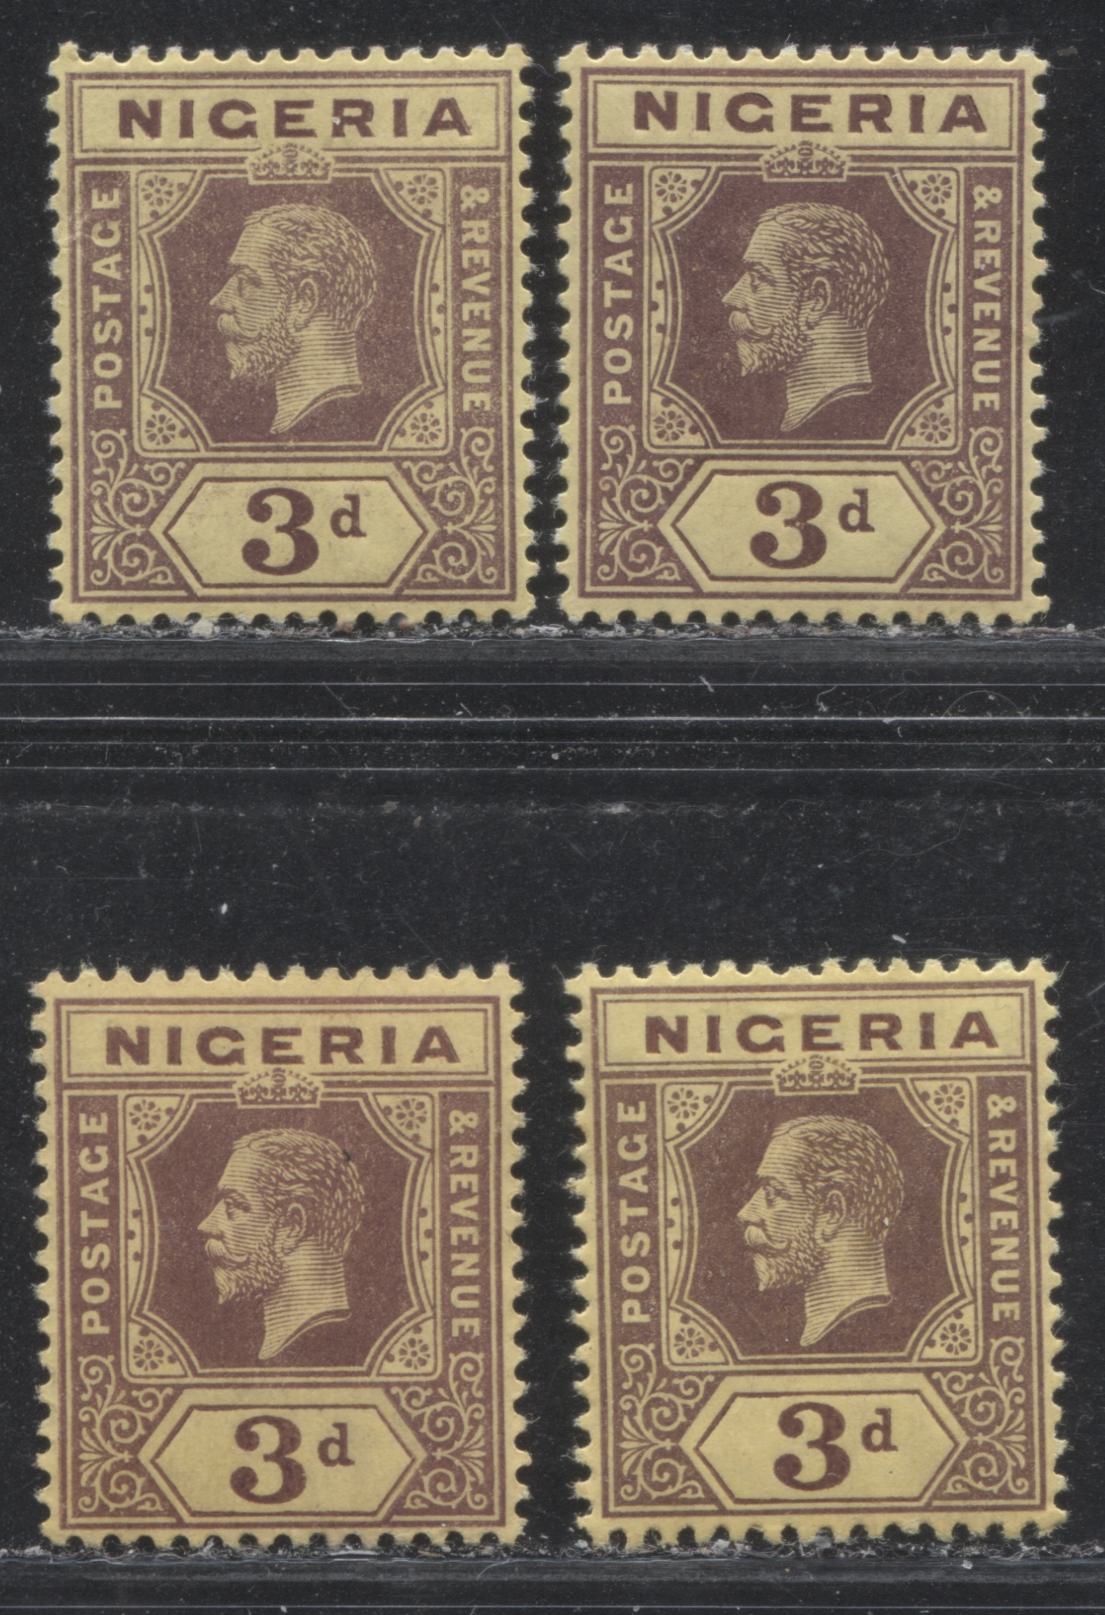 Lot 186 Nigeria SG# 5-5a 3d Chcolate Brown & Purple Brown on Yellow Paper With White and Lemon Backs King George V, 1914-1921 Multiple Crown CA Imperium Keyplate Issue, Four VFOG Examples